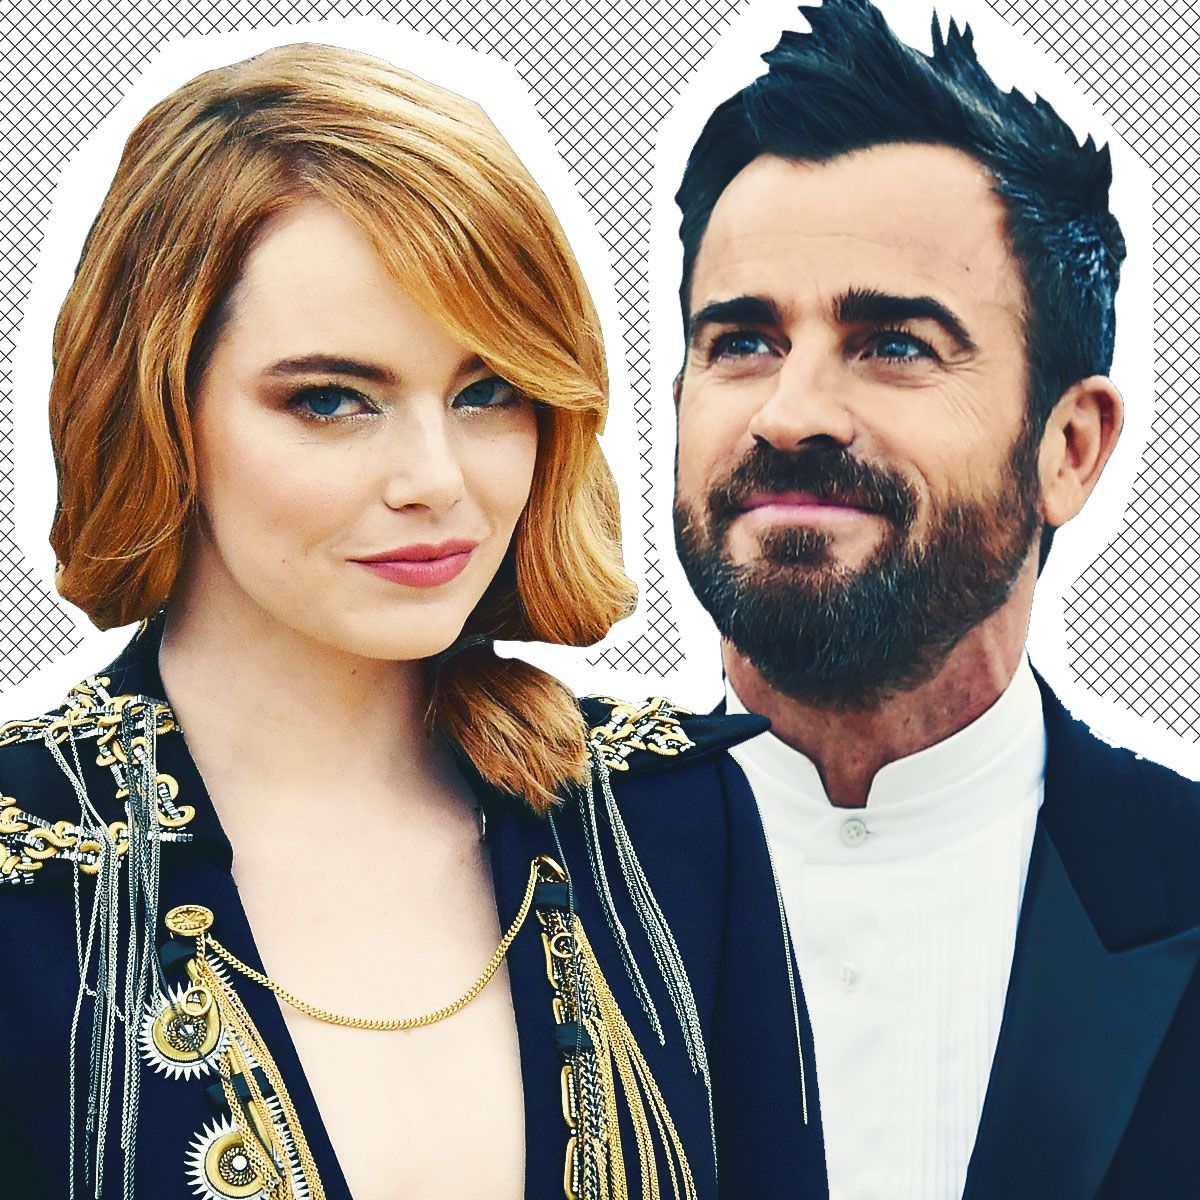 Emma Stone grins as she and Justin Theroux leave Met Gala party